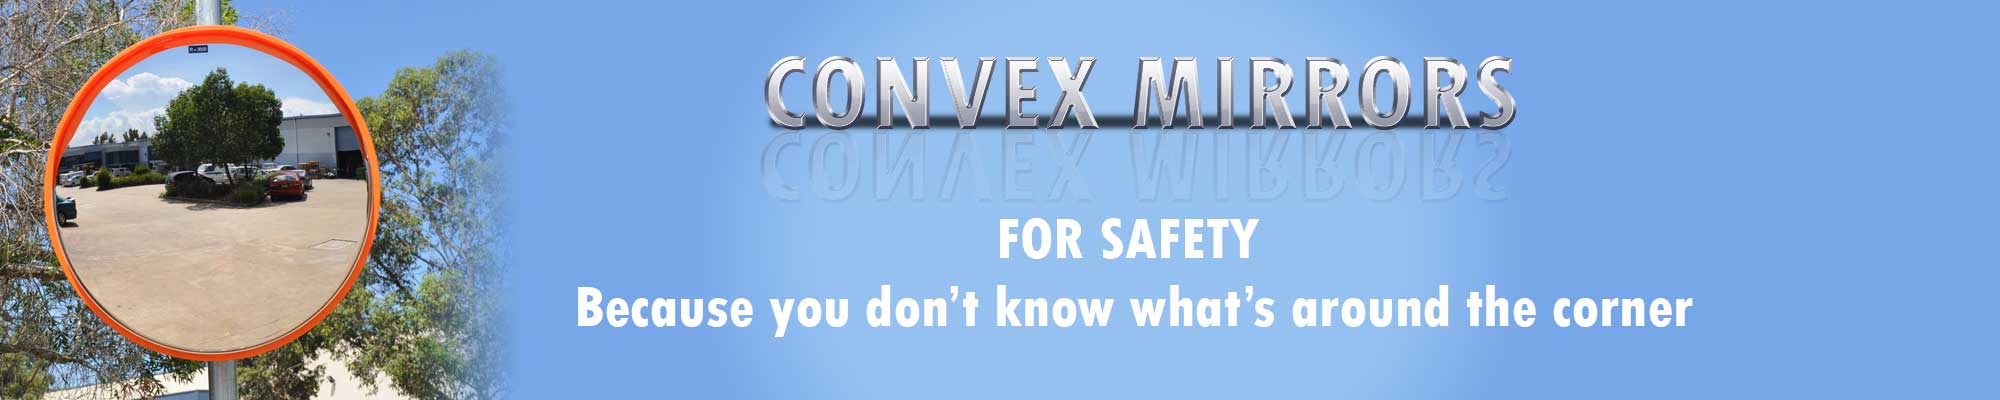 Convex Mirrors - For Safety